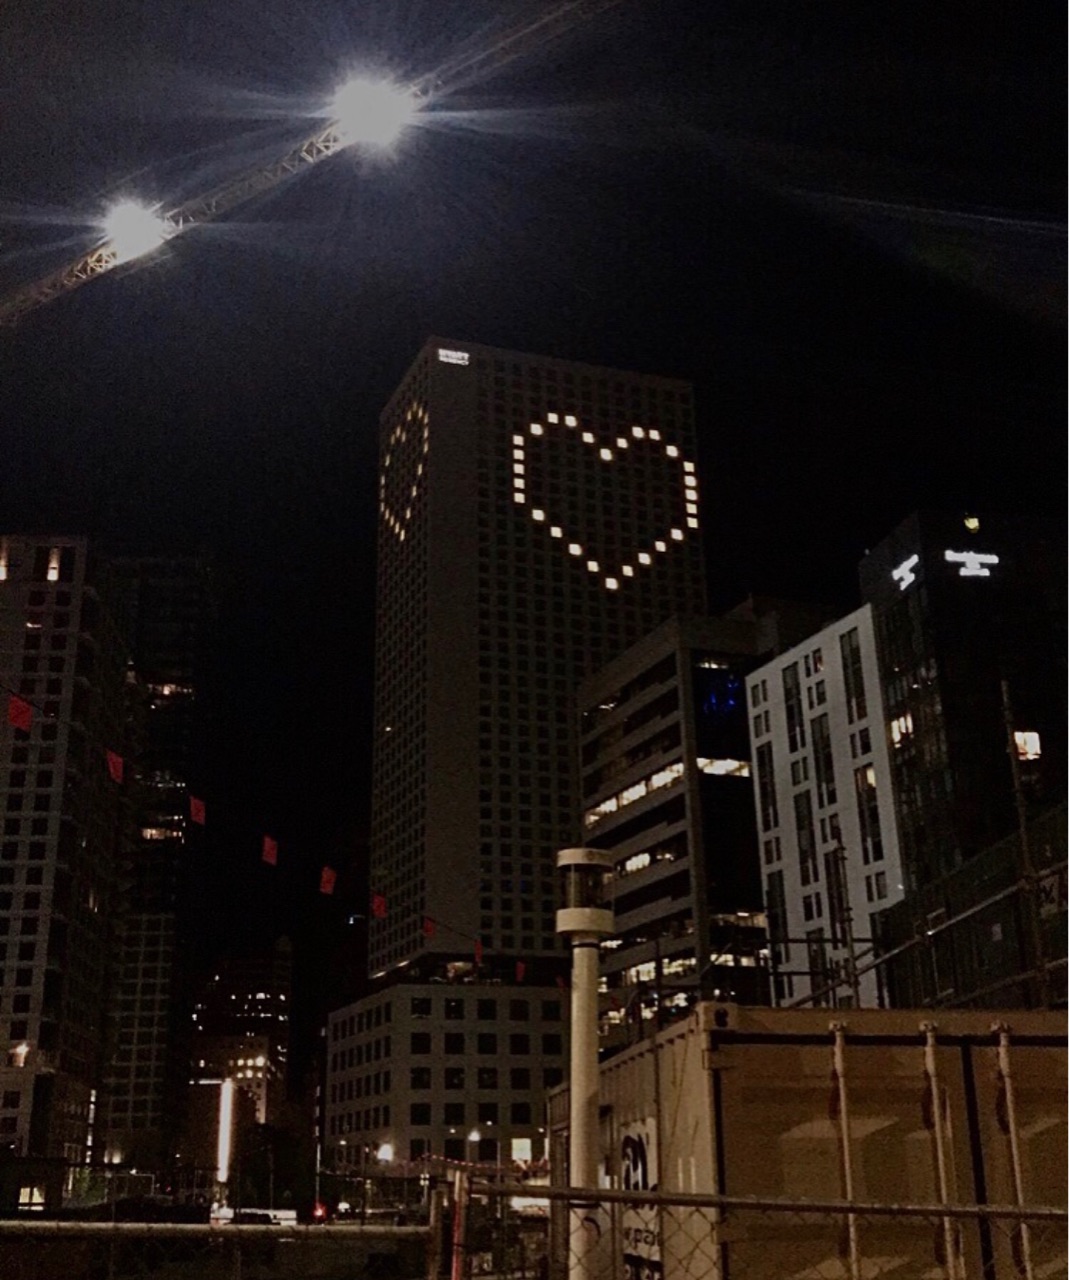 Download Blurry Heart Lights On Building Picture  Wallpaperscom